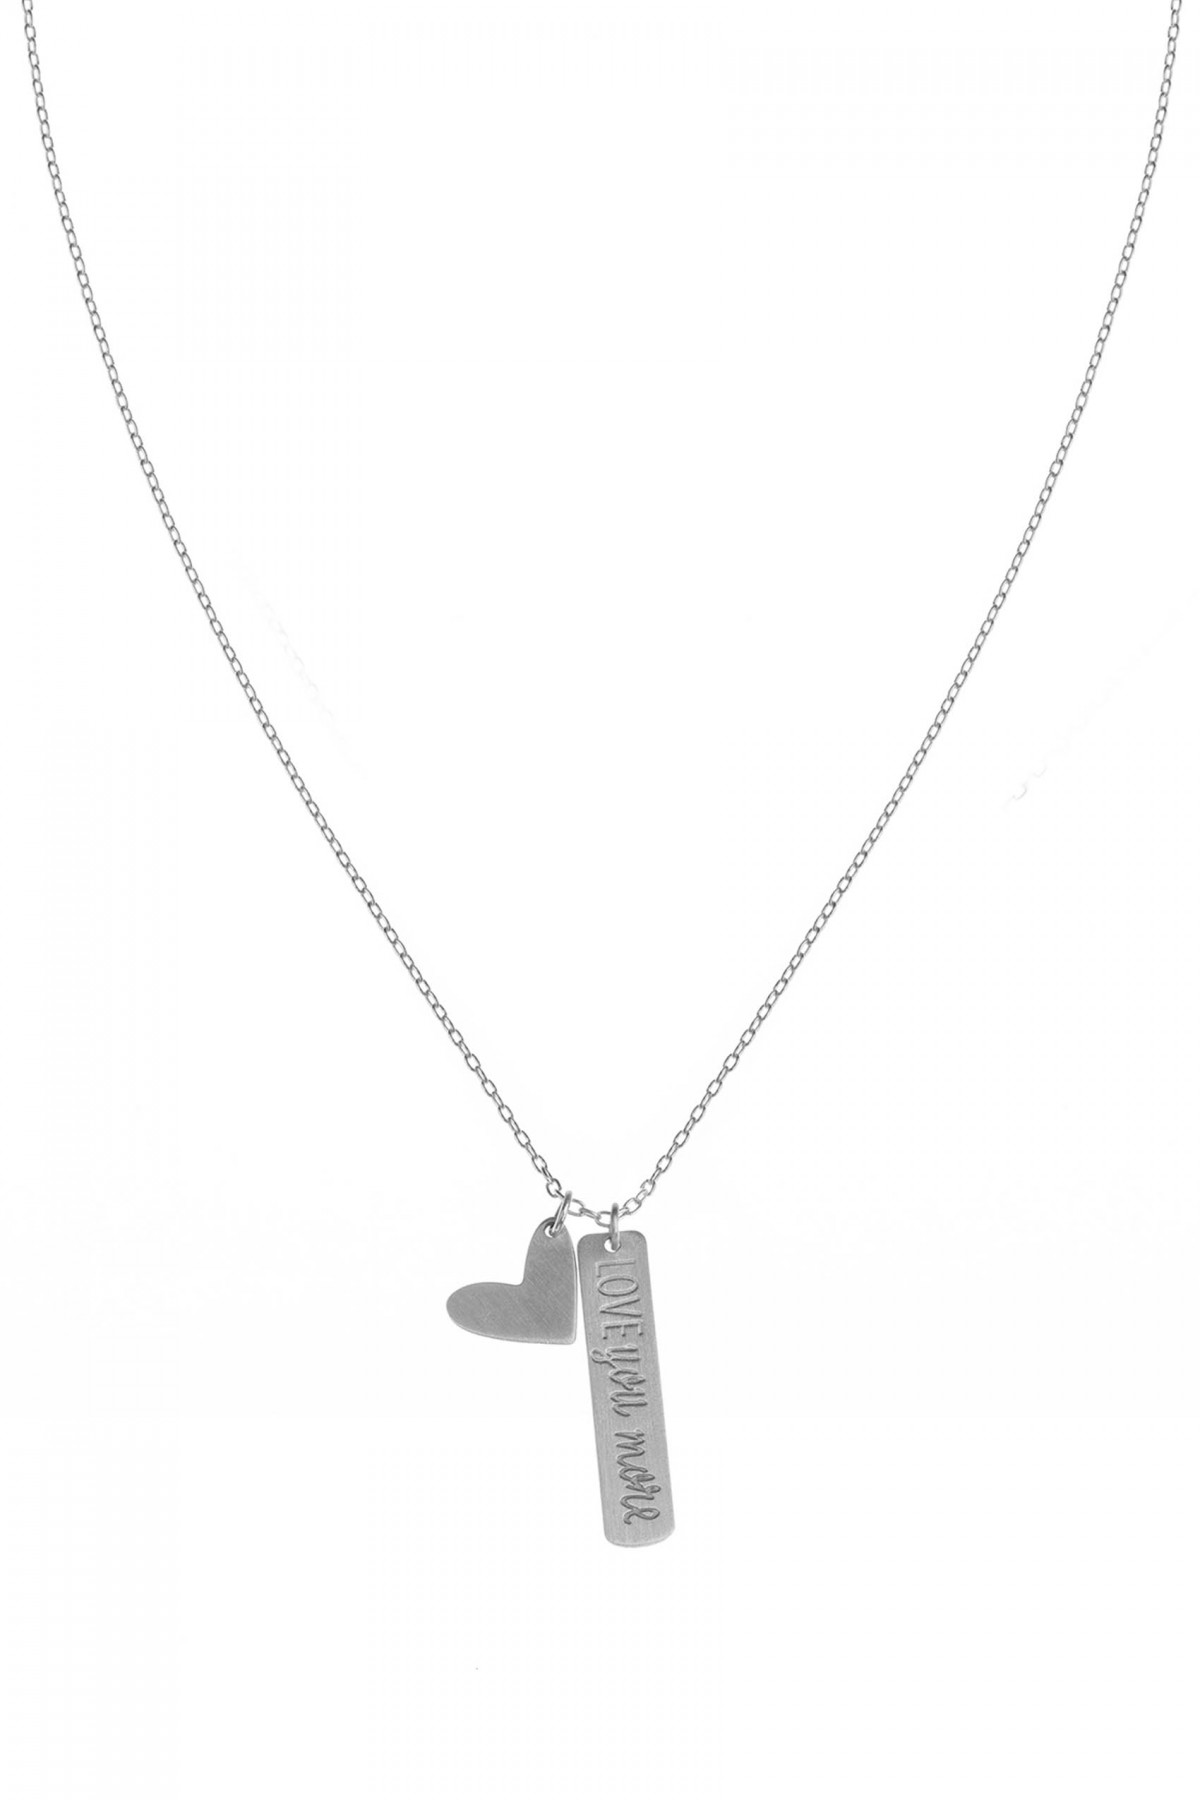 Love you More Necklace